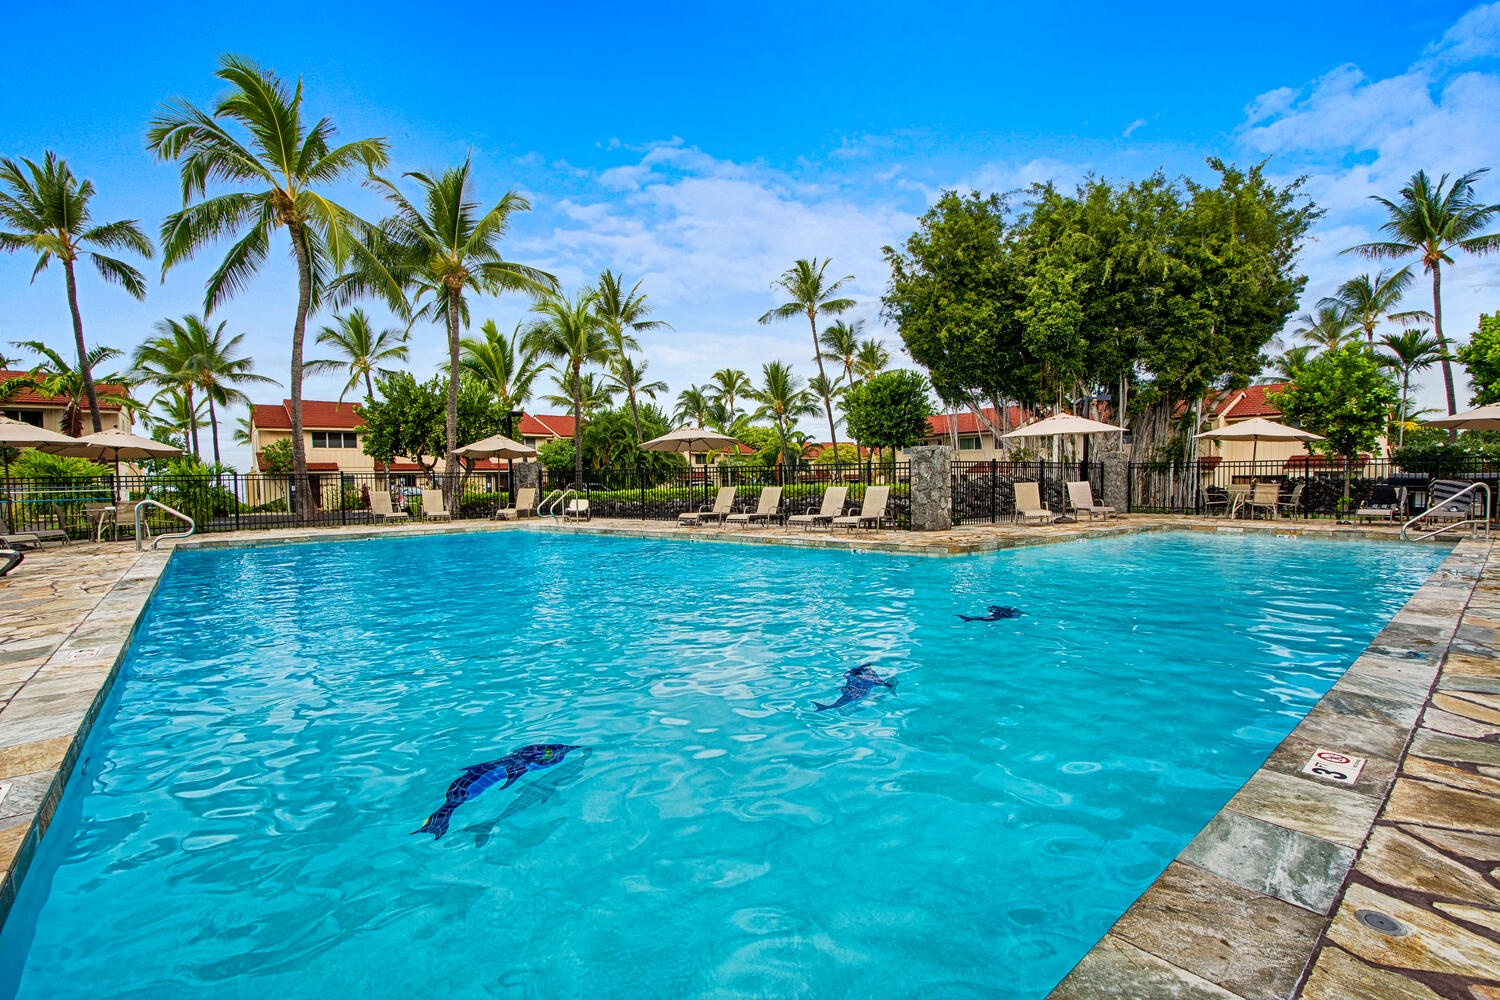 Kailua Kona Vacation Rentals, Keauhou Kona Surf & Racquet 1104 - Lounge in style beside the shimmering pool on comfortable chaise lounges — the perfect spot for sunbathing and serene relaxation.